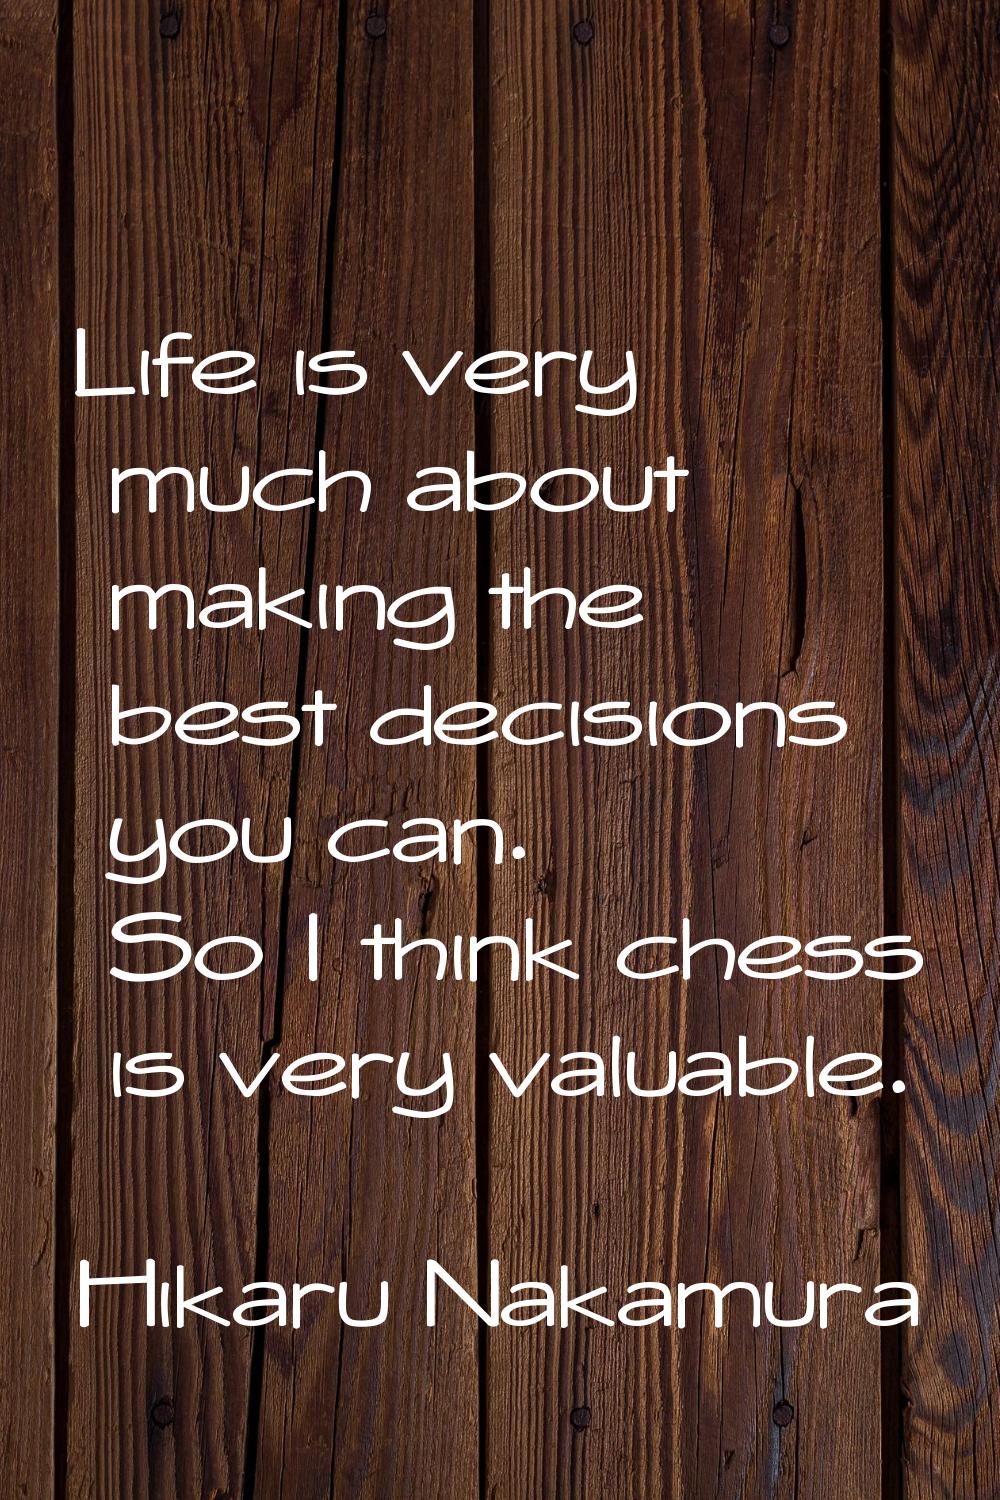 Life is very much about making the best decisions you can. So I think chess is very valuable.